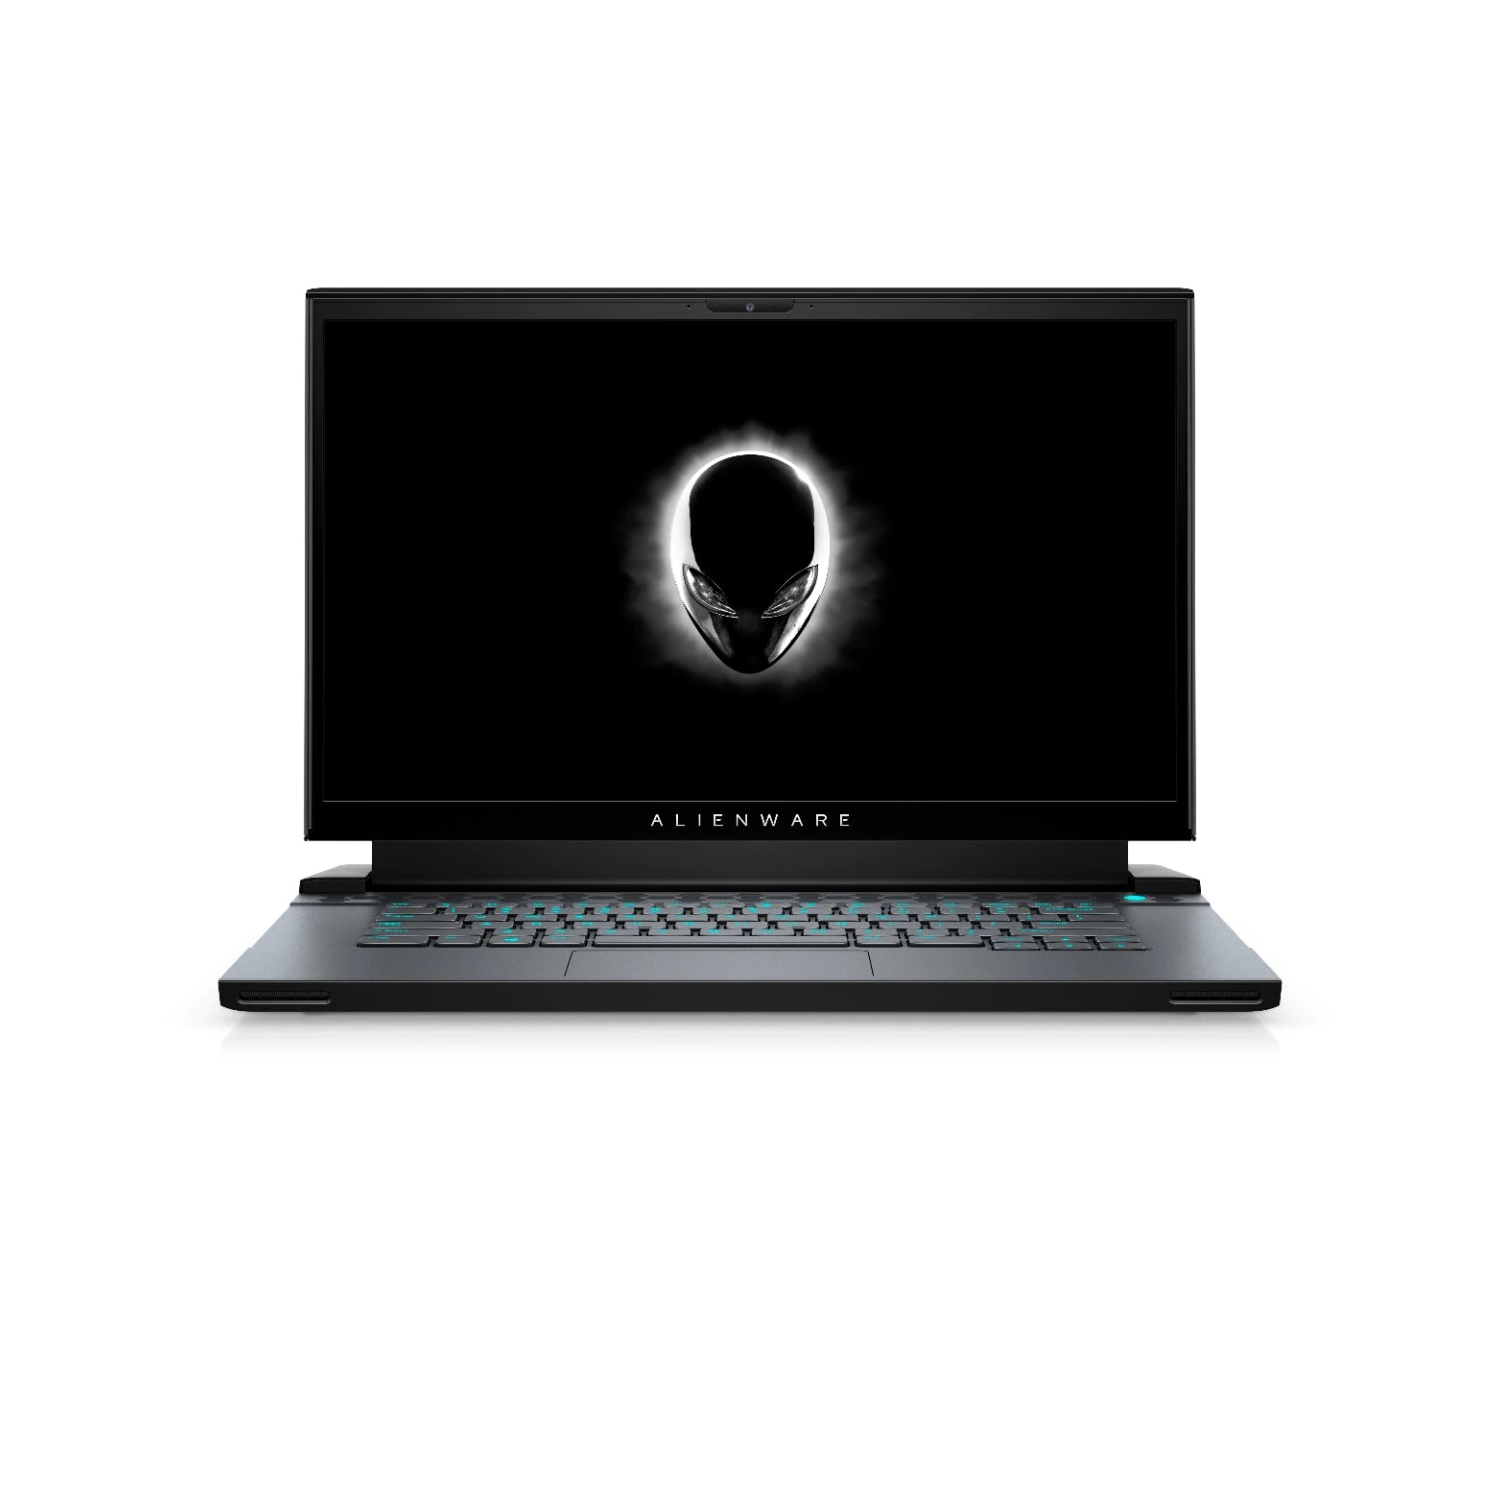 Refurbished (Excellent) – Dell Alienware m15 R4 Gaming Laptop (2021) | 15.6" FHD | Core i7 - 2TB SSD + 2TB SSD - 16GB RAM - RTX 3070 | 8 Cores @ 5 GHz - 10th Gen CPU - 8GB GDDR6